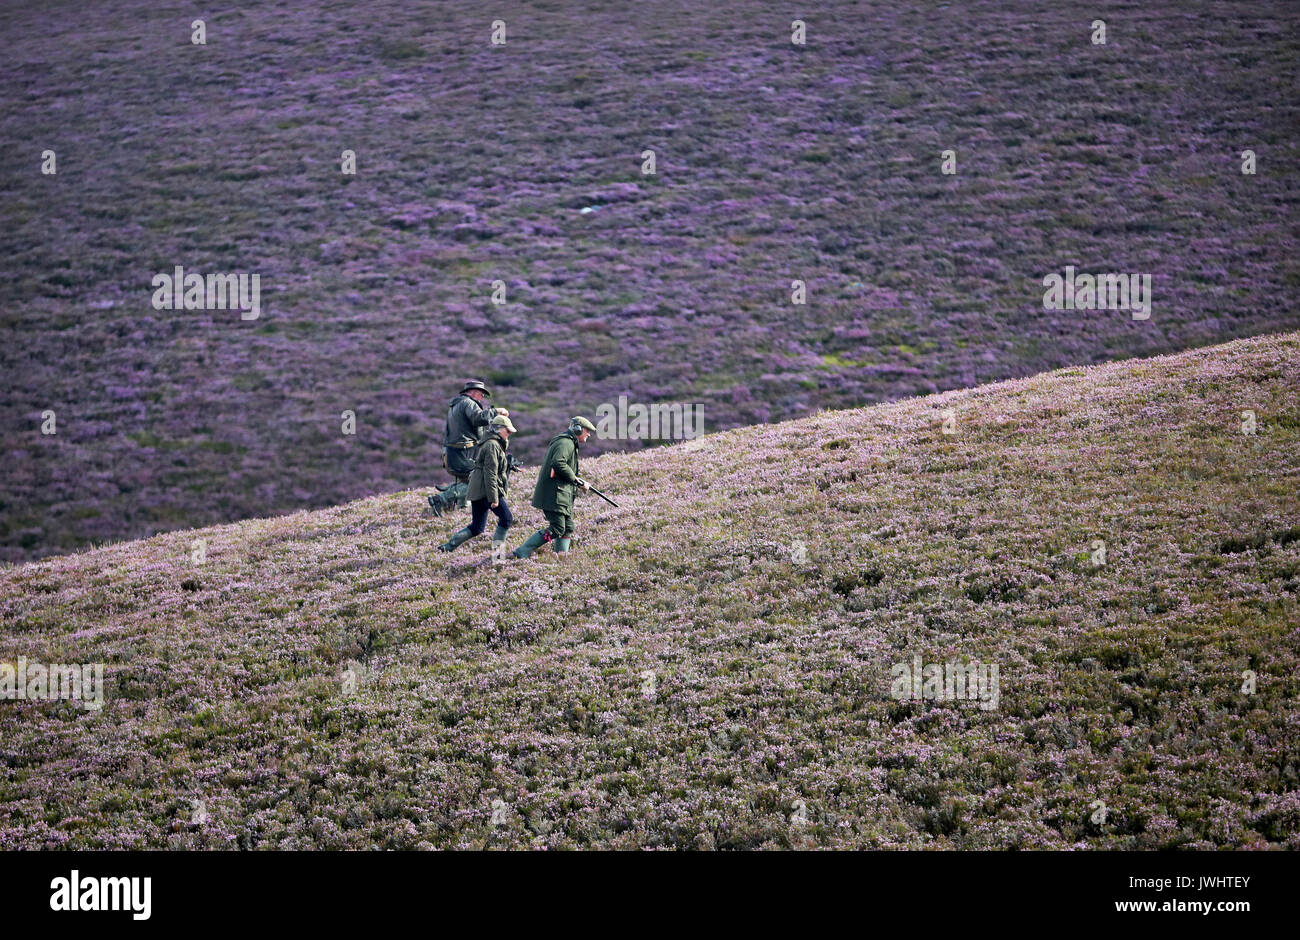 Members of a shooting party on the moors at the Alvie Estate near Aviemore on the Glorious Twelfth, the start of the grouse shooting season. Stock Photo